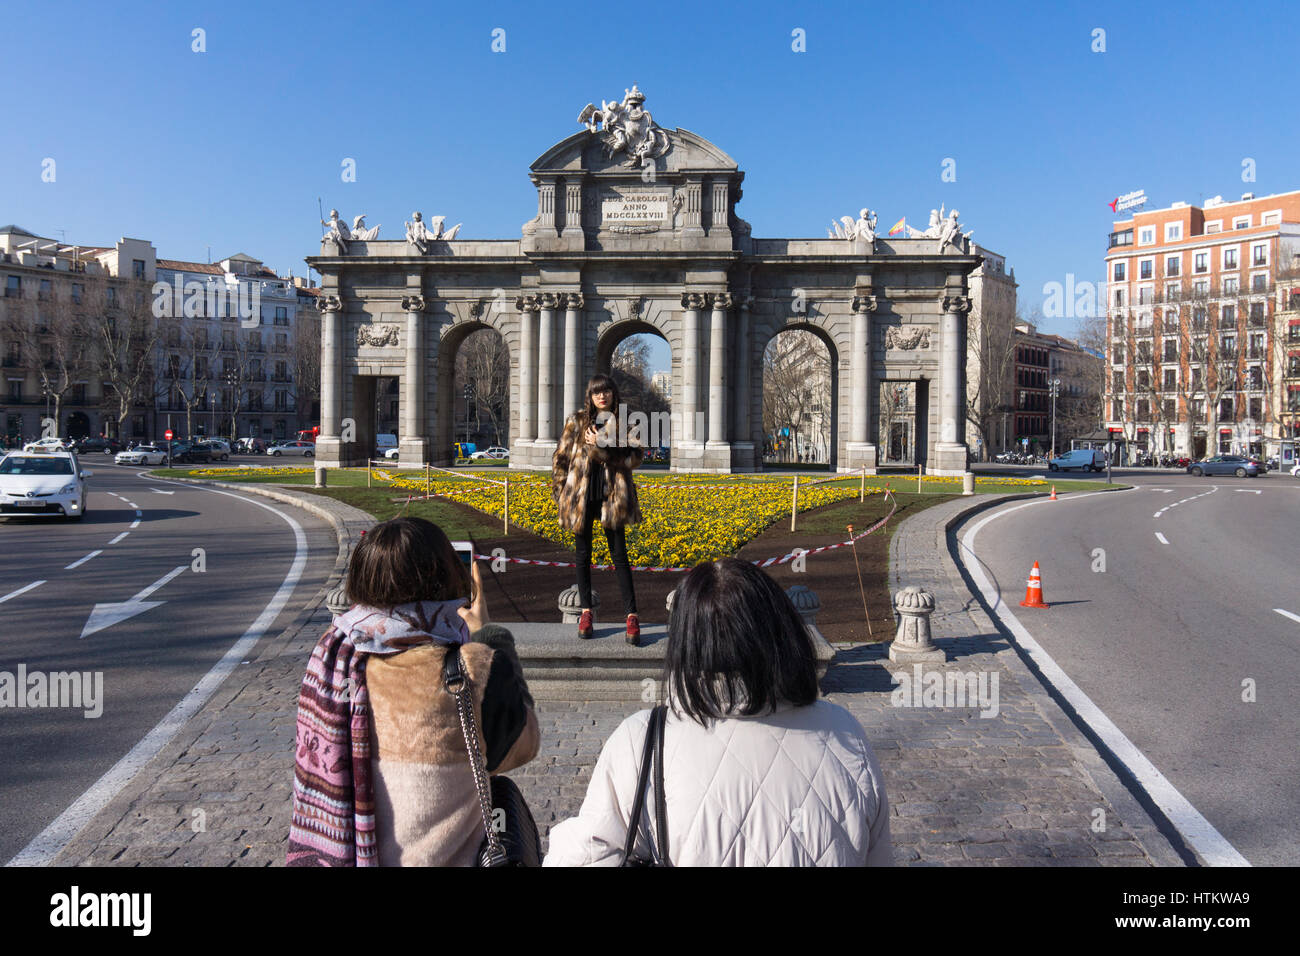 Tourist posing for a photograph in front of the Puerta de Alcalá, a triumphal arch in the Plaza de la Independencia, Madrid Stock Photo